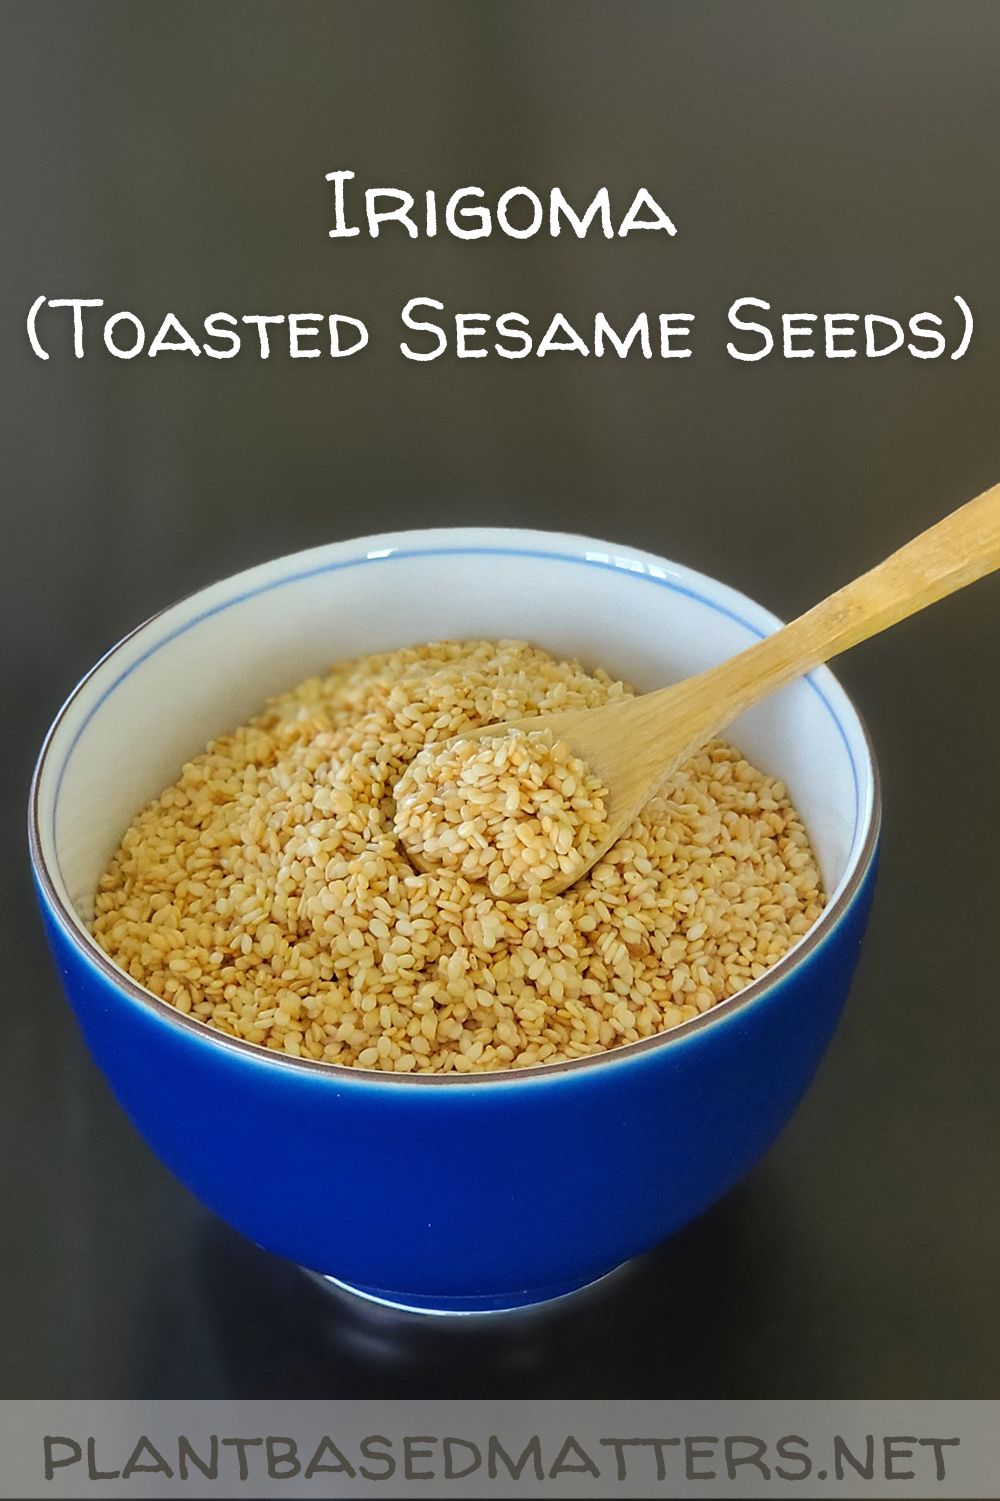 13 Unique Ways To Use Sesame Seeds You May Not Have Thought Of